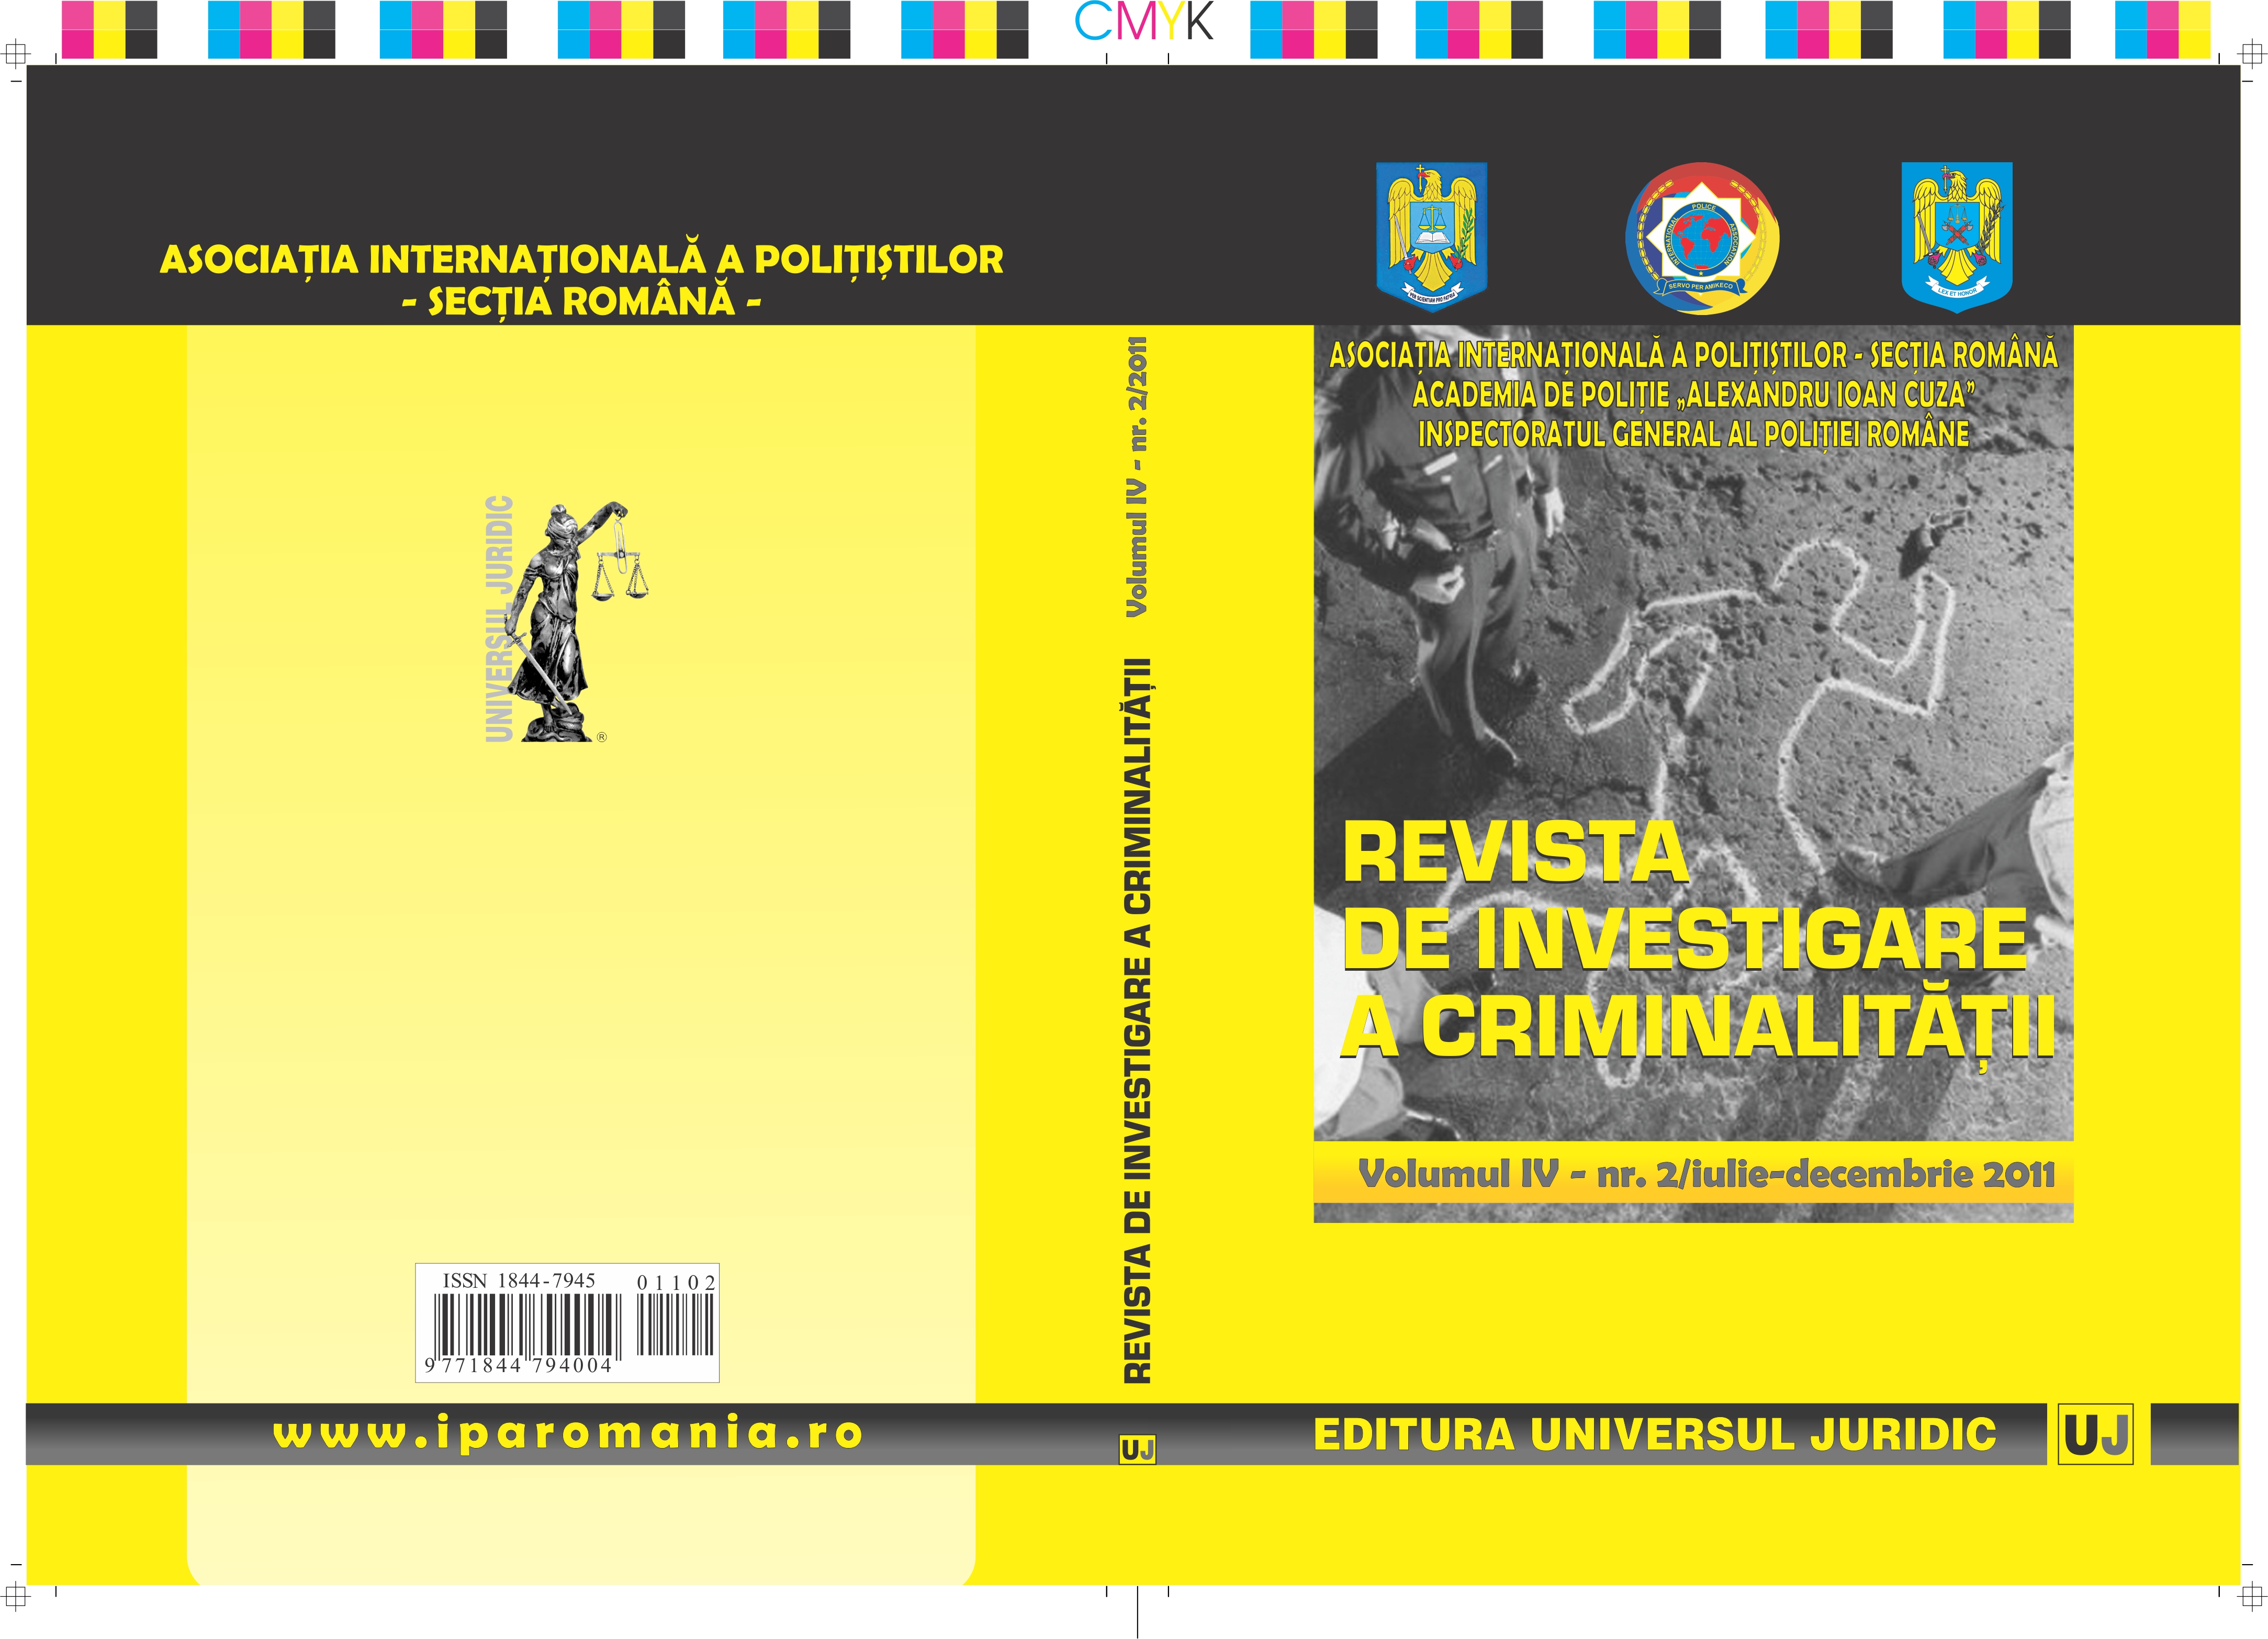 THREATS AND RISKS OF CORRUPTION AT THE STATE OF ANTI - COMPETITION PRACTICES IN ROMANIA, A MEMBER COUNTRY OF THE EUROPEAN UNION. CASE STUDY Cover Image